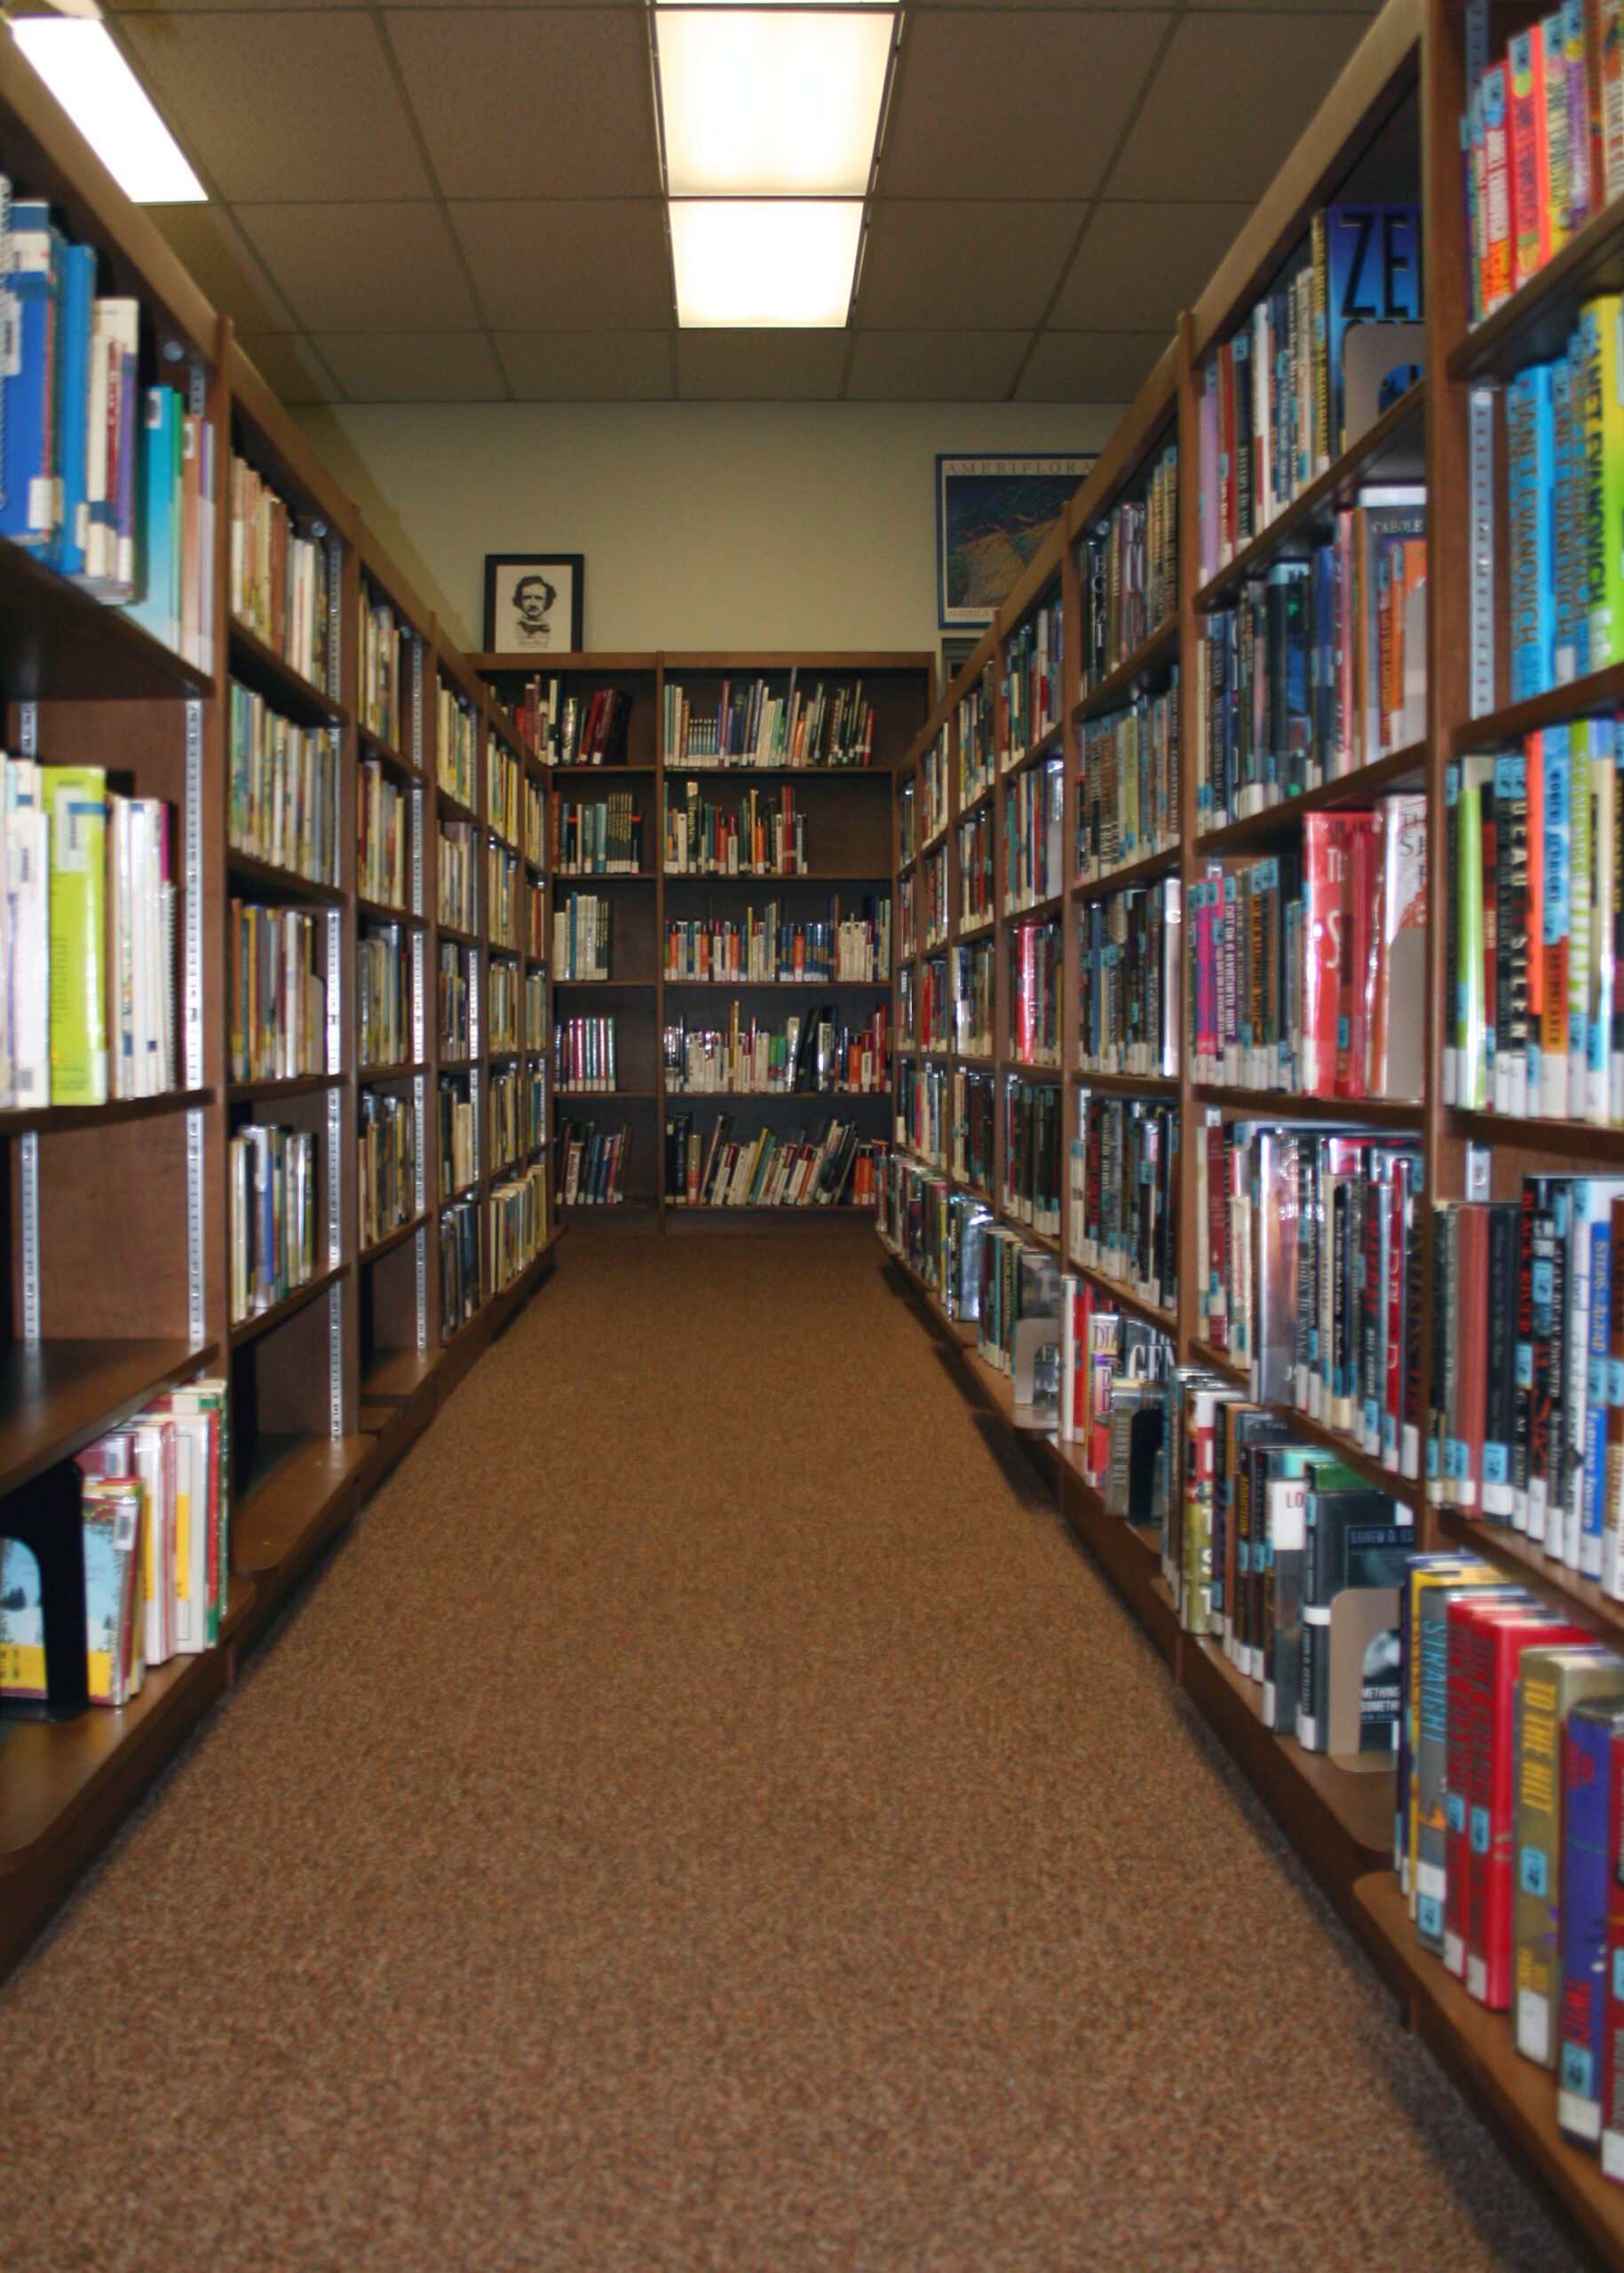 Photo Looking Down A Row Of Shelves In A Library